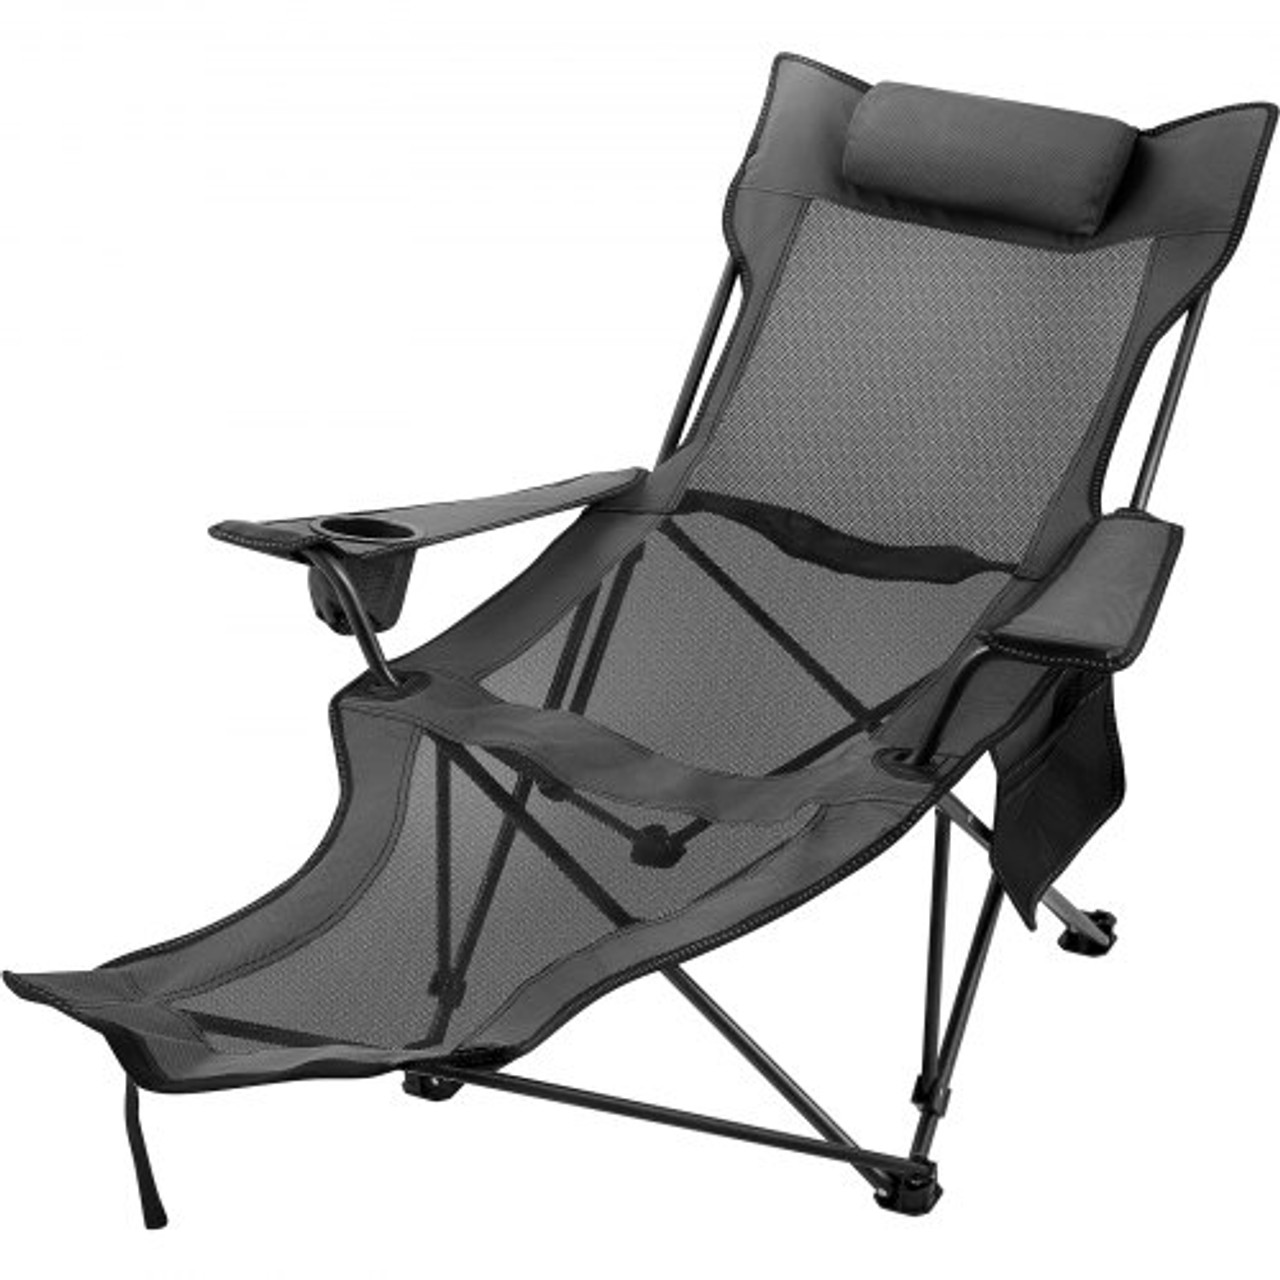 Folding Camp Chair with Footrest Mesh, Portable Lounge Chair with Cup Holder and Storage Bag, for Camping Fishing and Other Outdoor Activities (Grey)